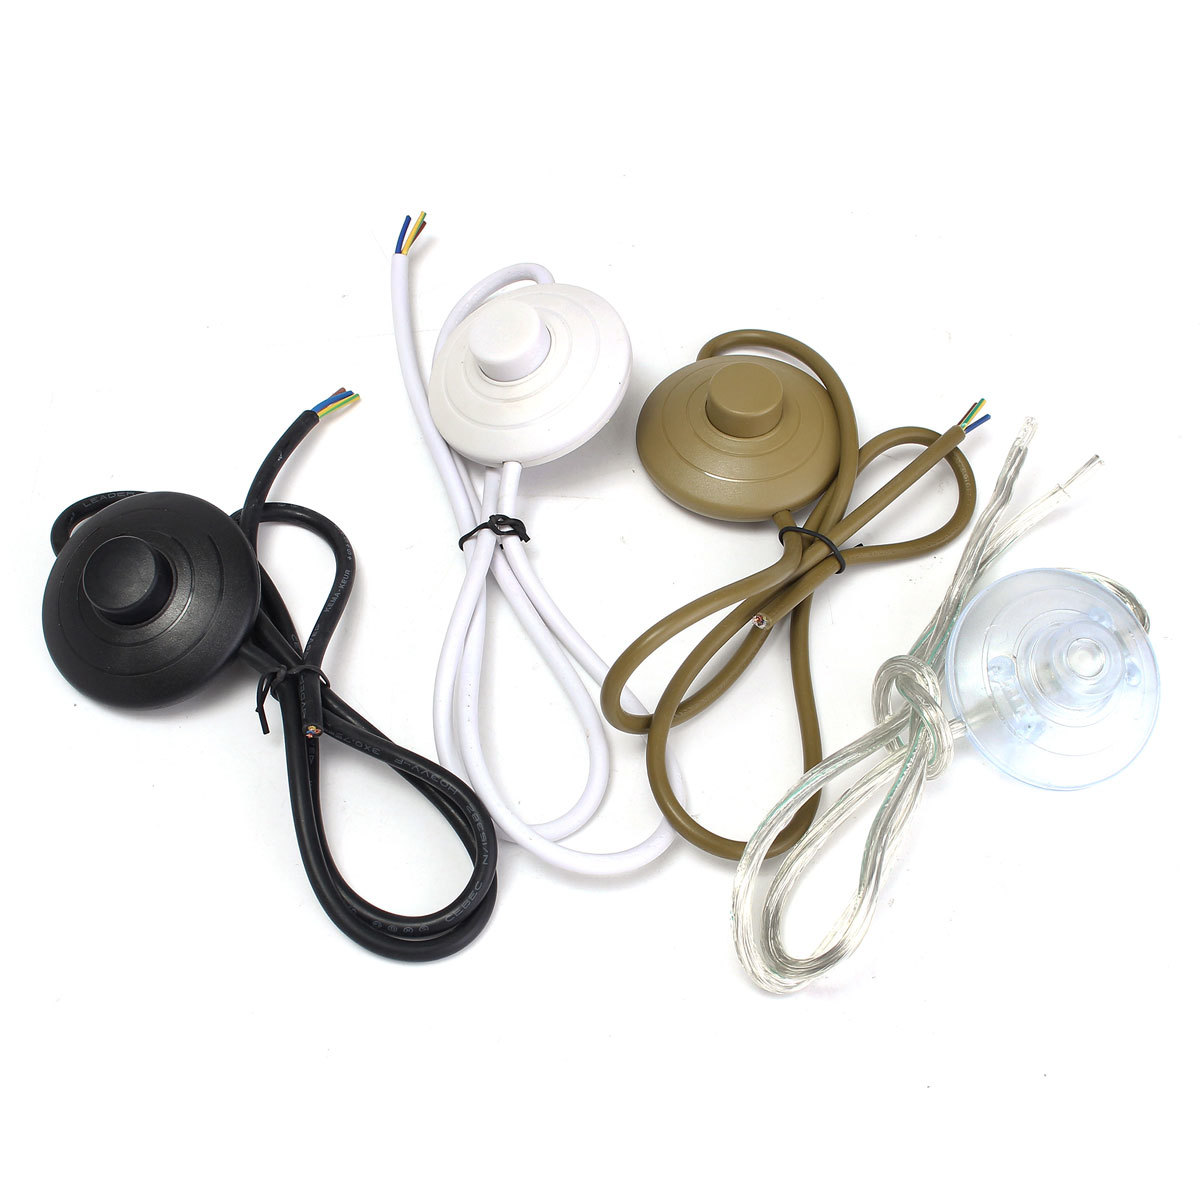 1M Circular Lighting Button Switch with 3 Core Inline Flex Cord for Table Desk Lamp 2